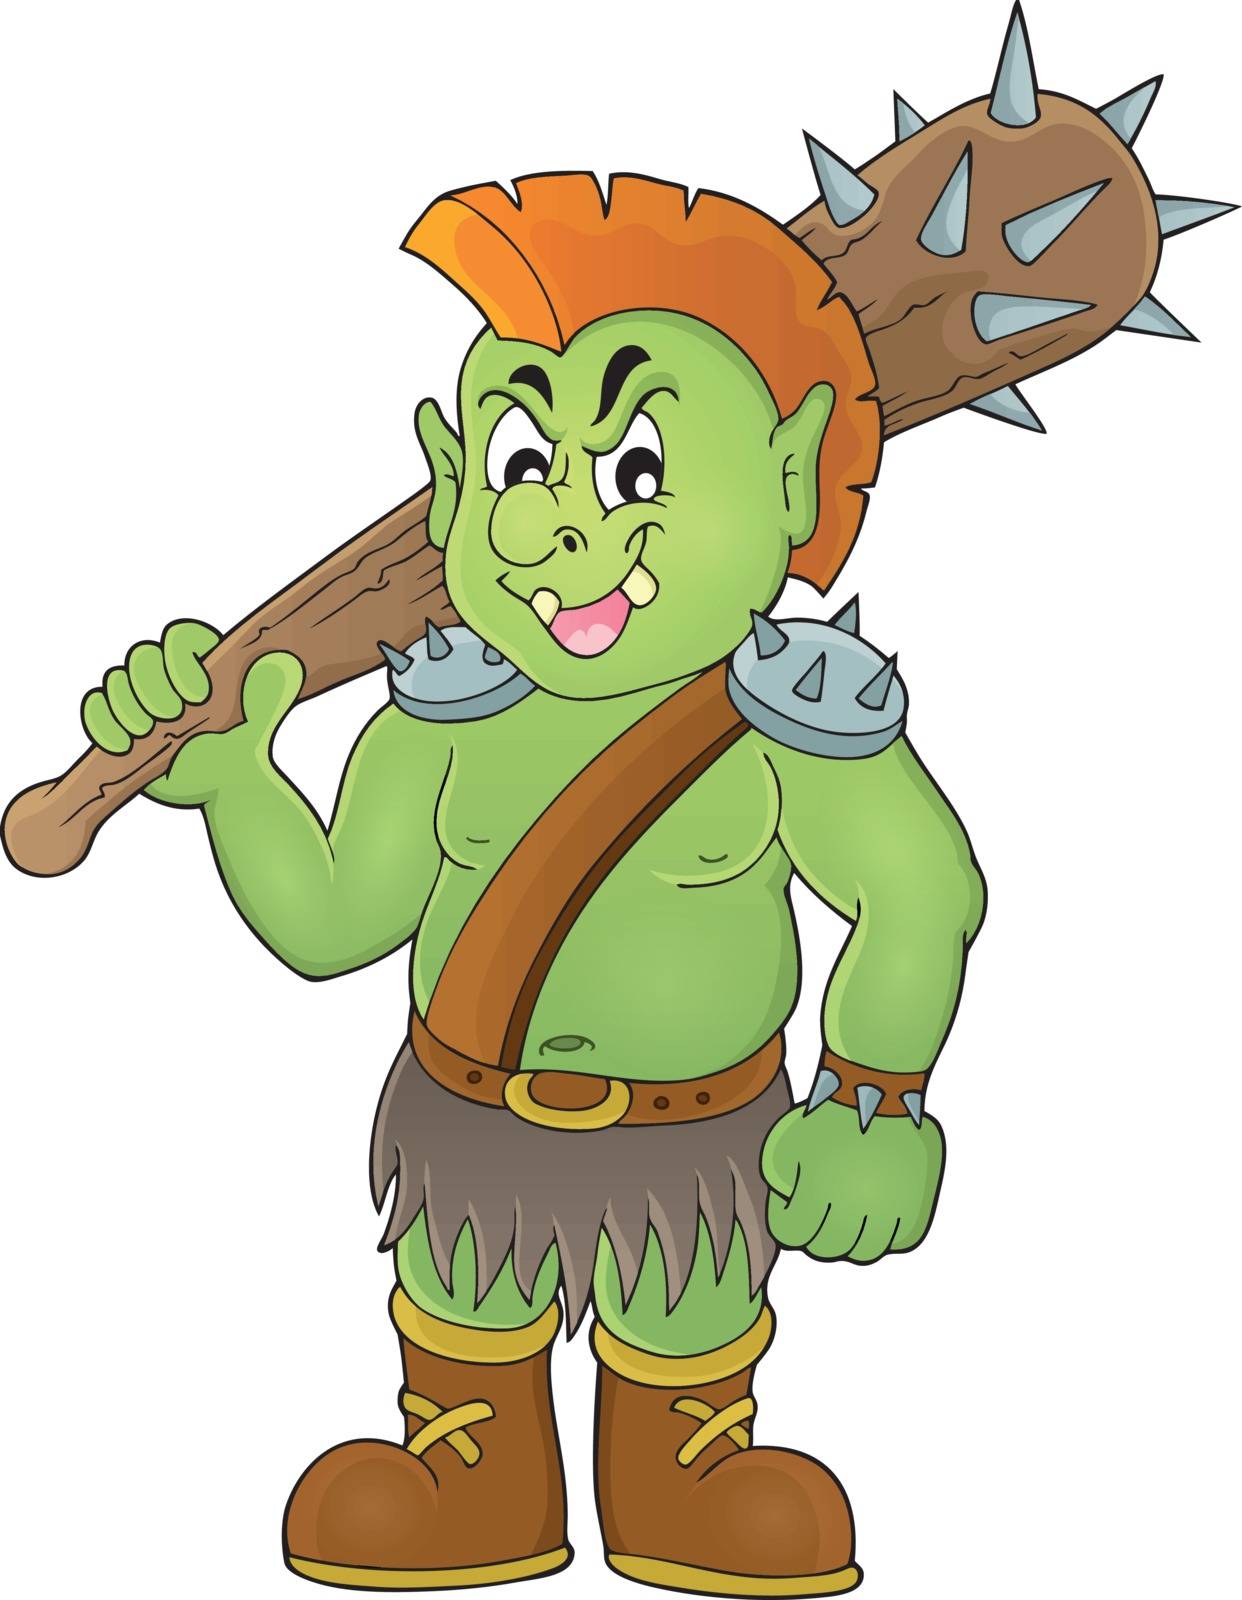 Orc theme image 1 - eps10 vector illustration.